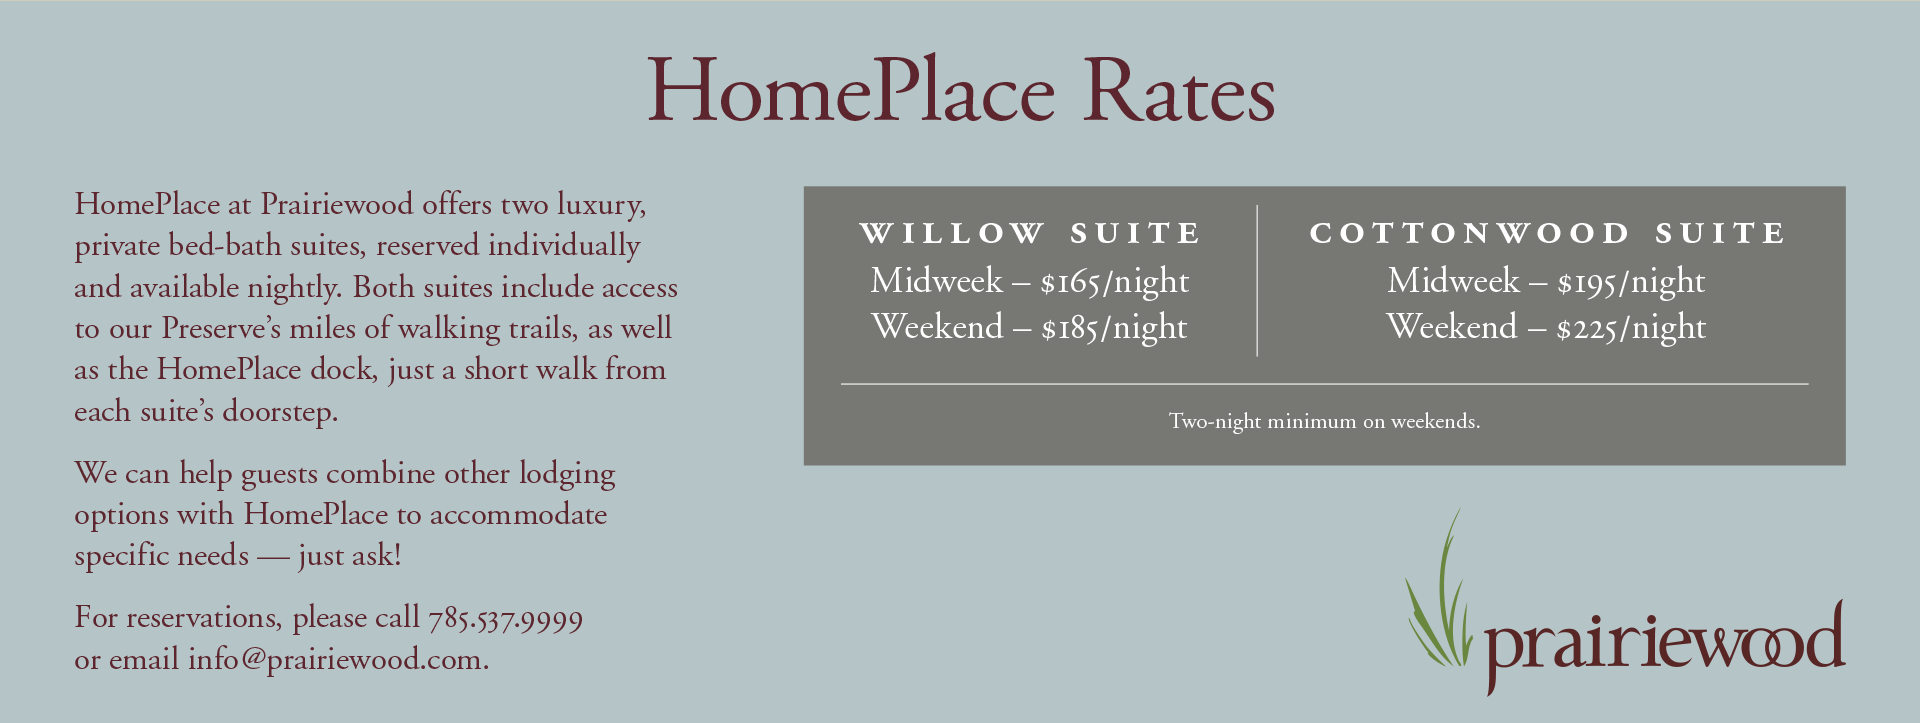 HomePlace Rates